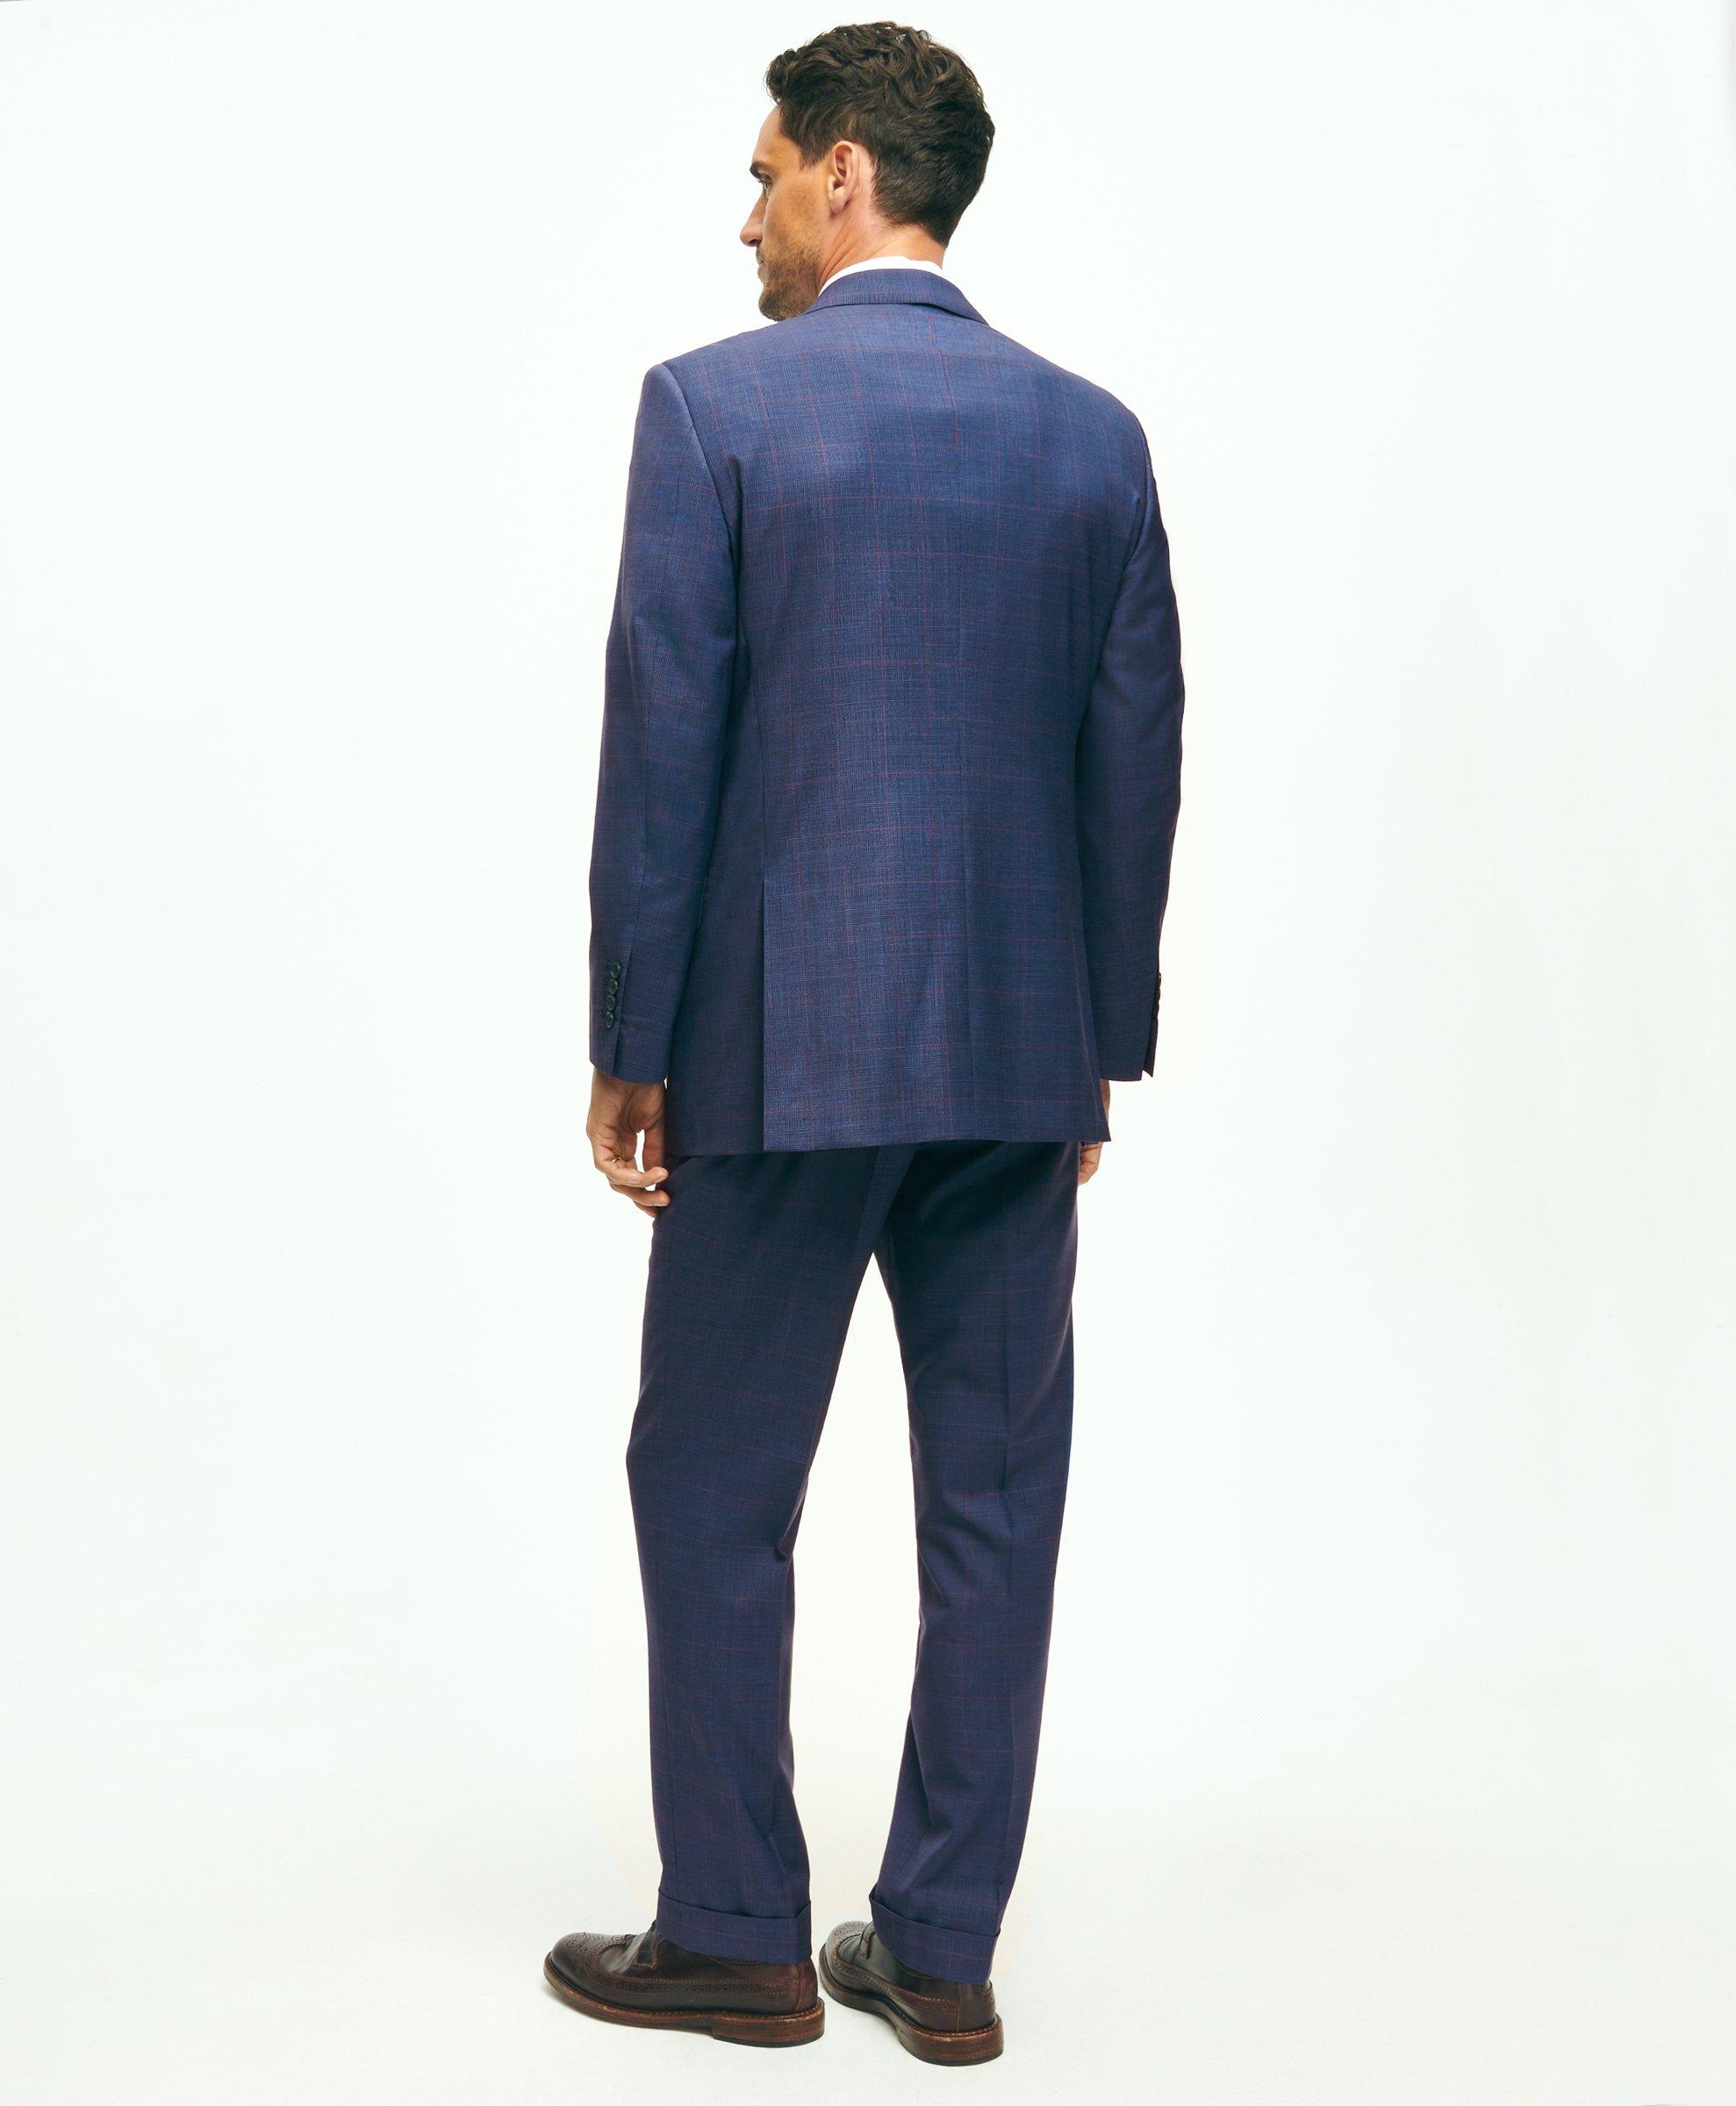 Affordable Suits | Brooks Brothers